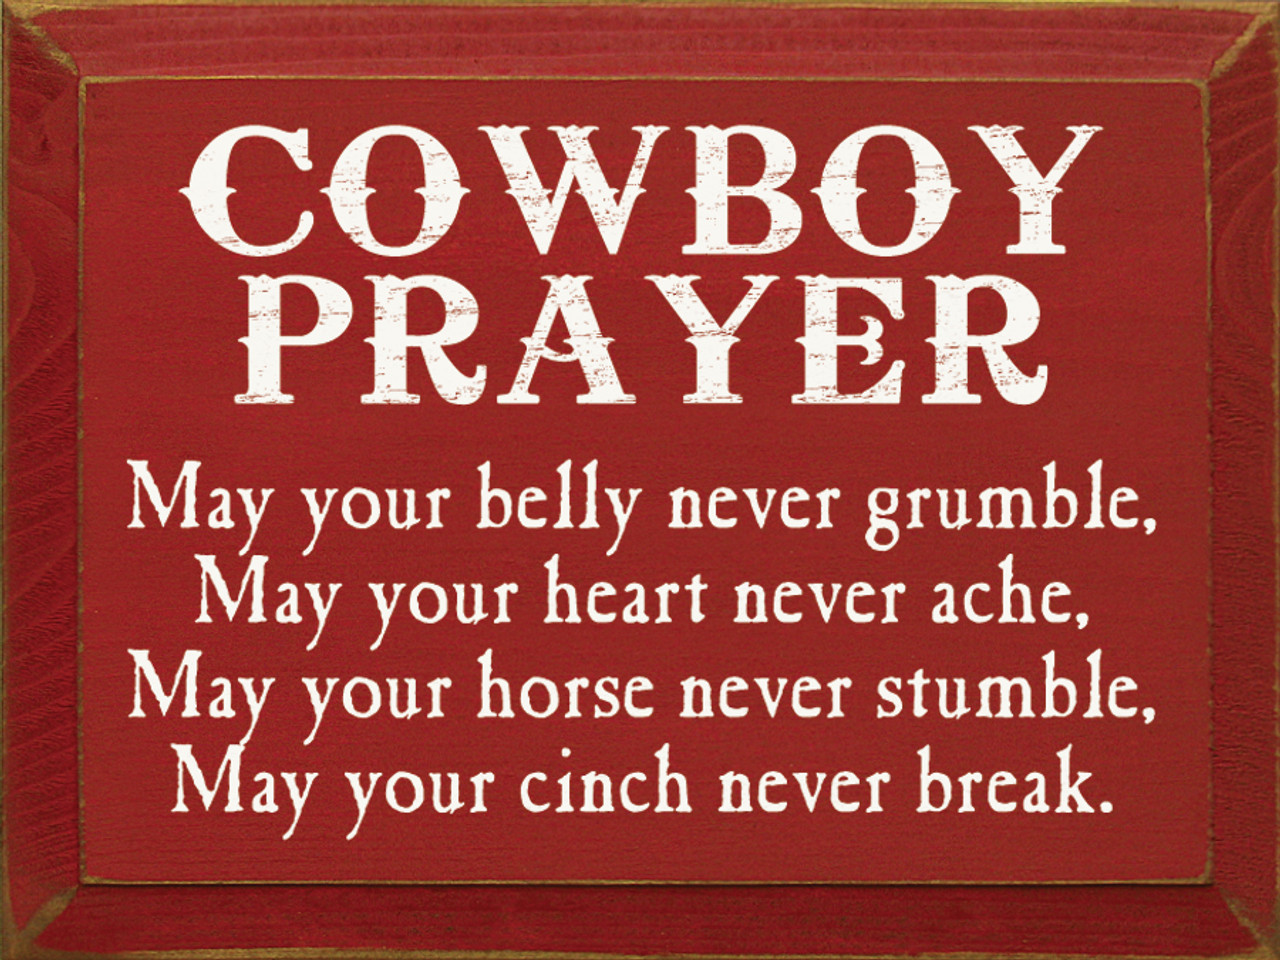 Cowboy Prayer: May belly never grumble, heart never ache, may your never